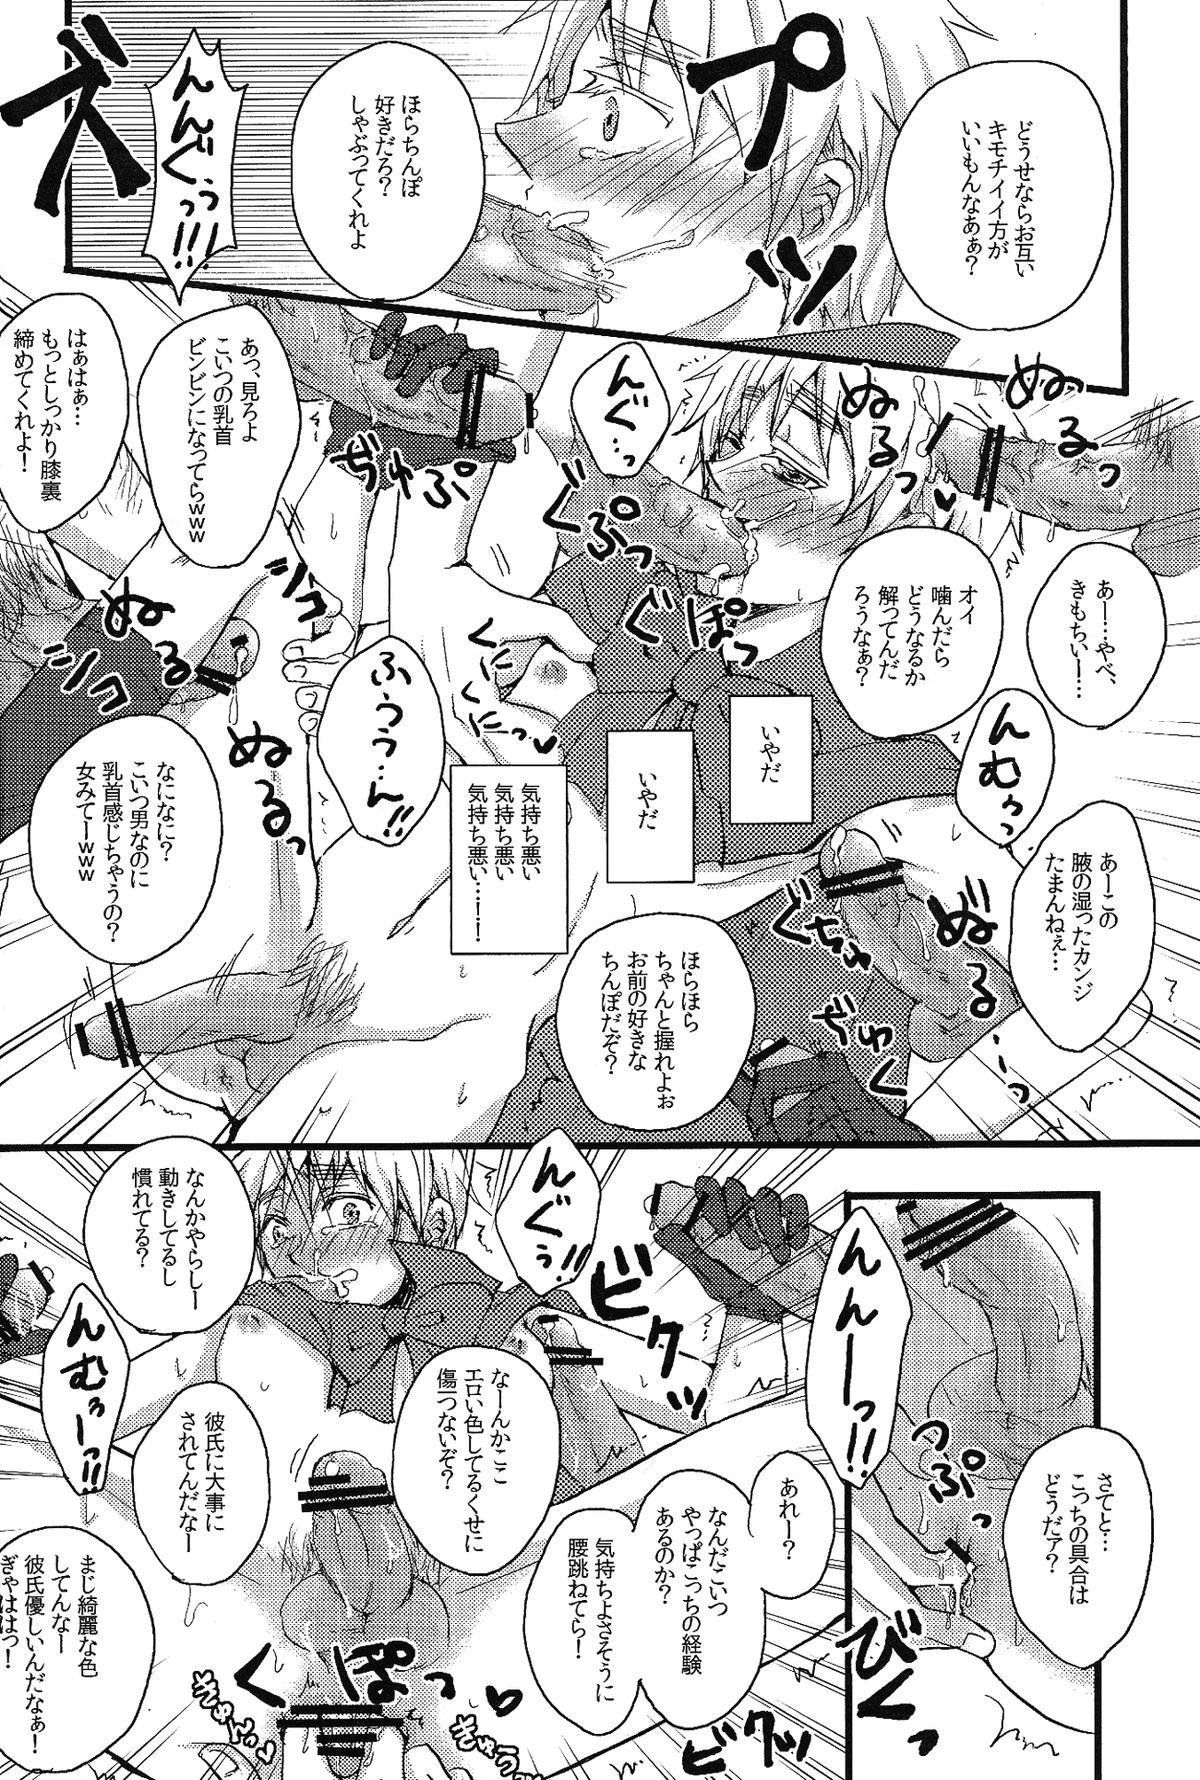 Strapon MAGICAL☆HEALING - Axis powers hetalia Double Penetration - Page 9